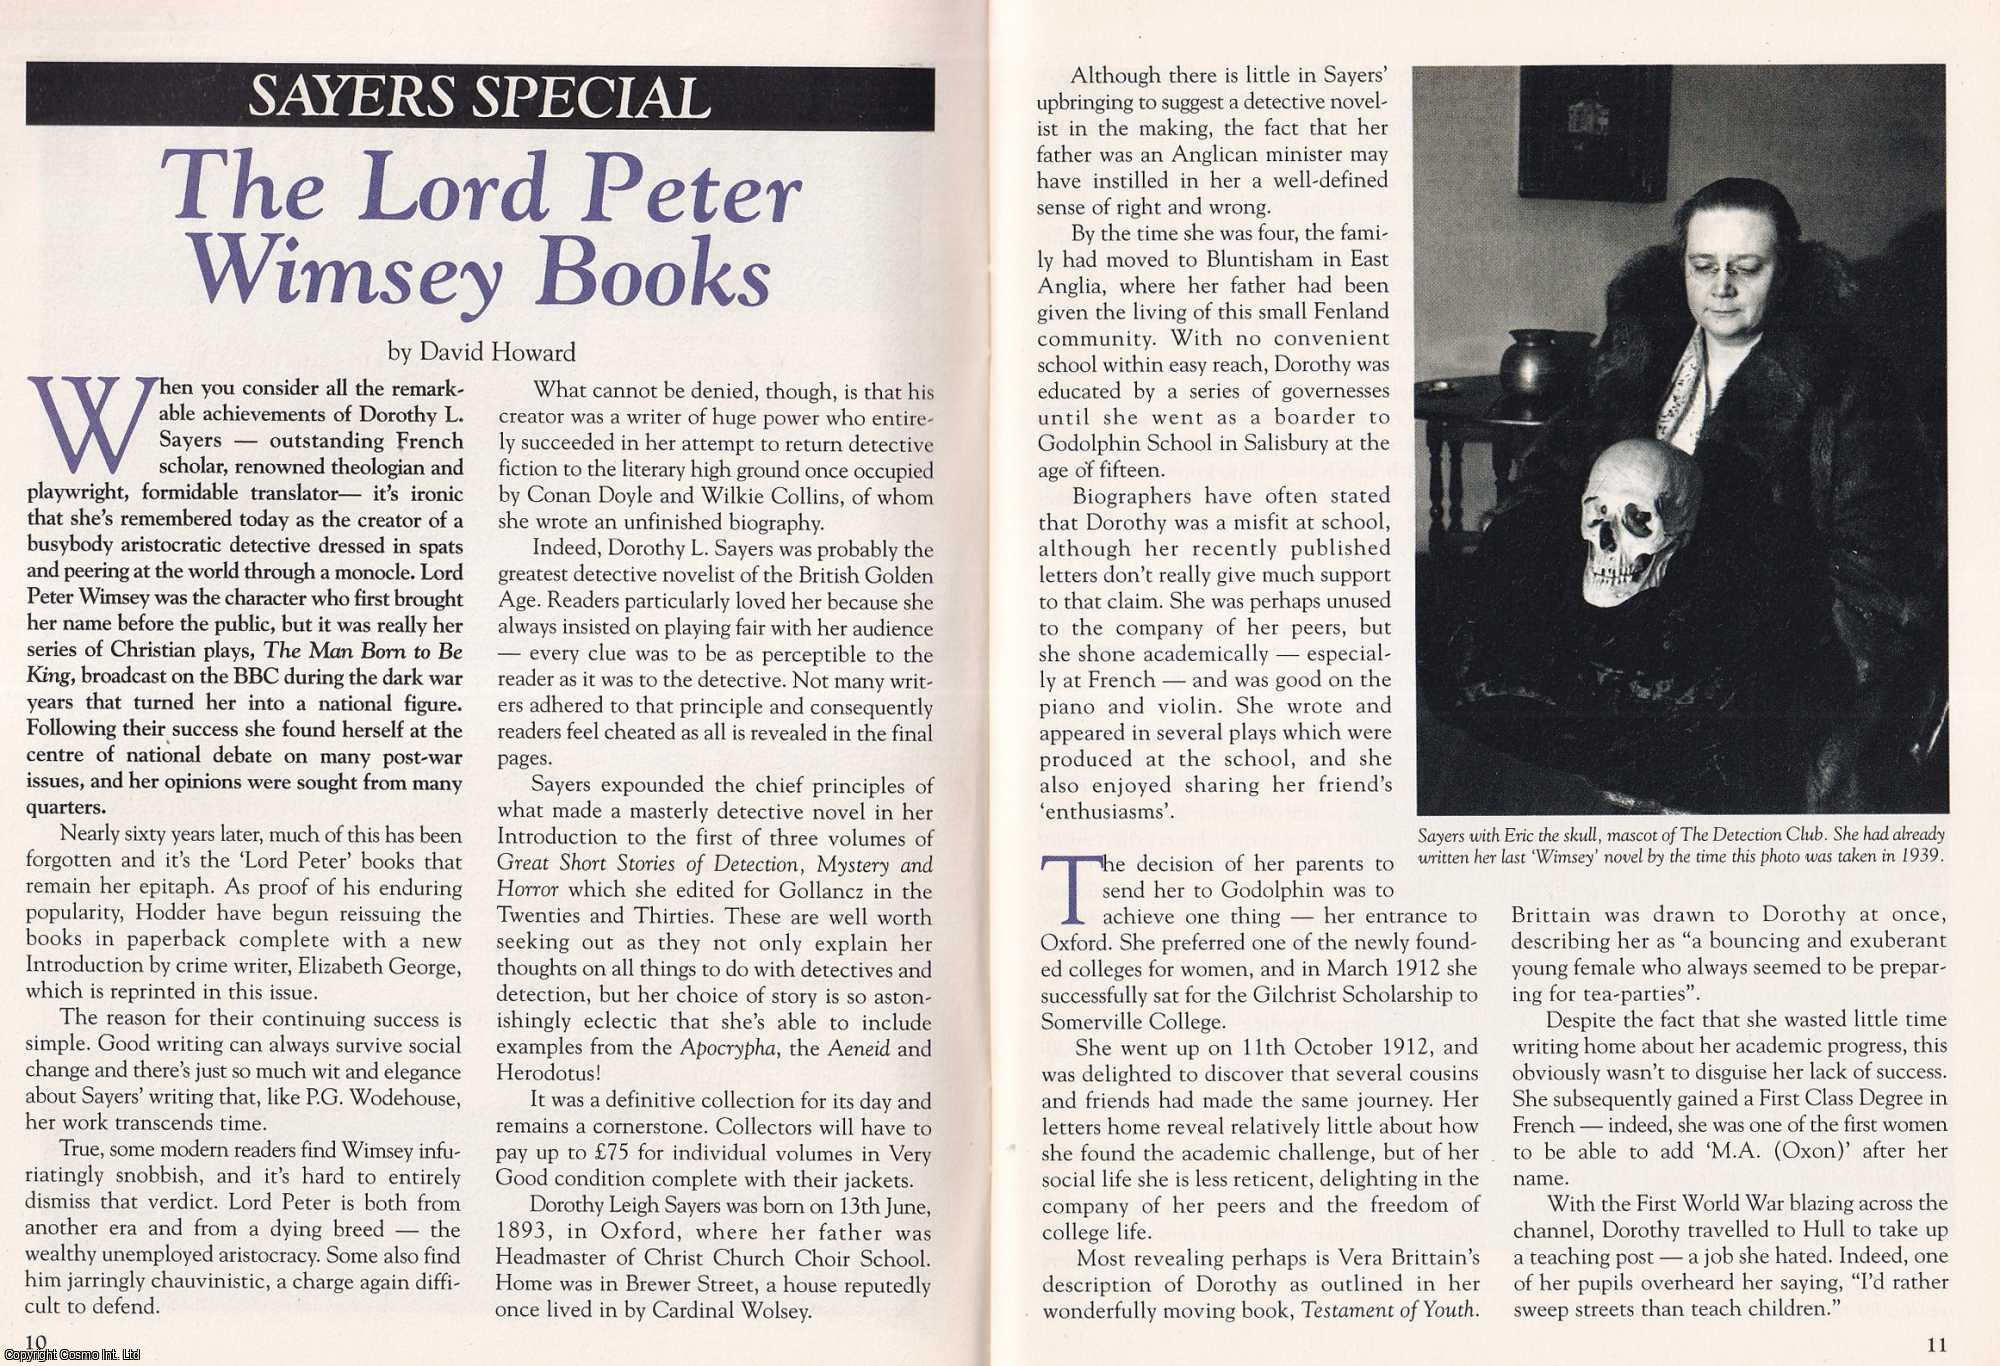 David Howard - Sayers Special. The Lord Peter Wimsey Books. This is an original article separated from an issue of The Book & Magazine Collector publication, 2004.